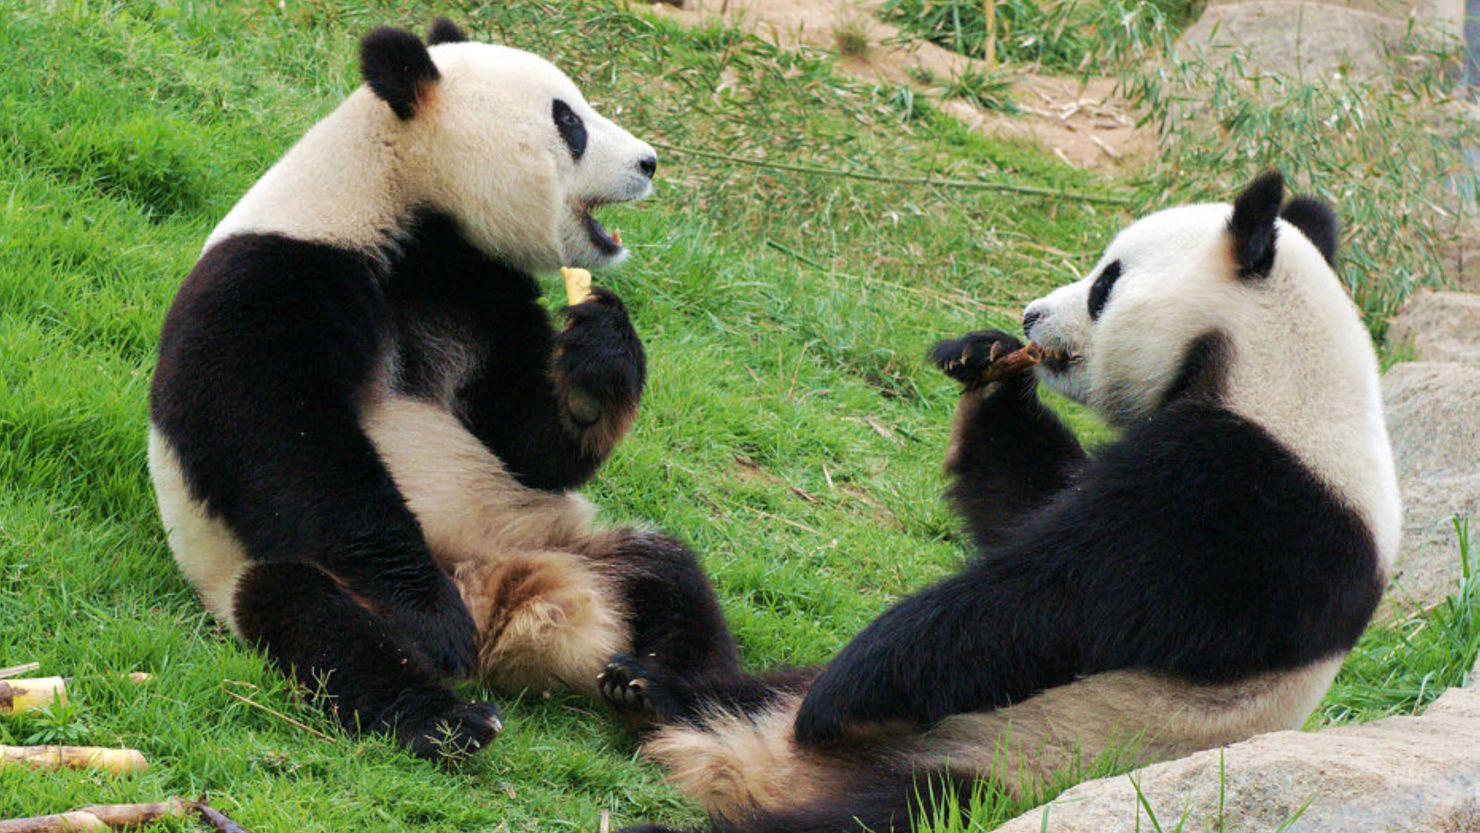 Pandas enjoy a meal of bamboo shoots at the Chengdu Research Base of Giant Panda Breeding on June 24, 2012.